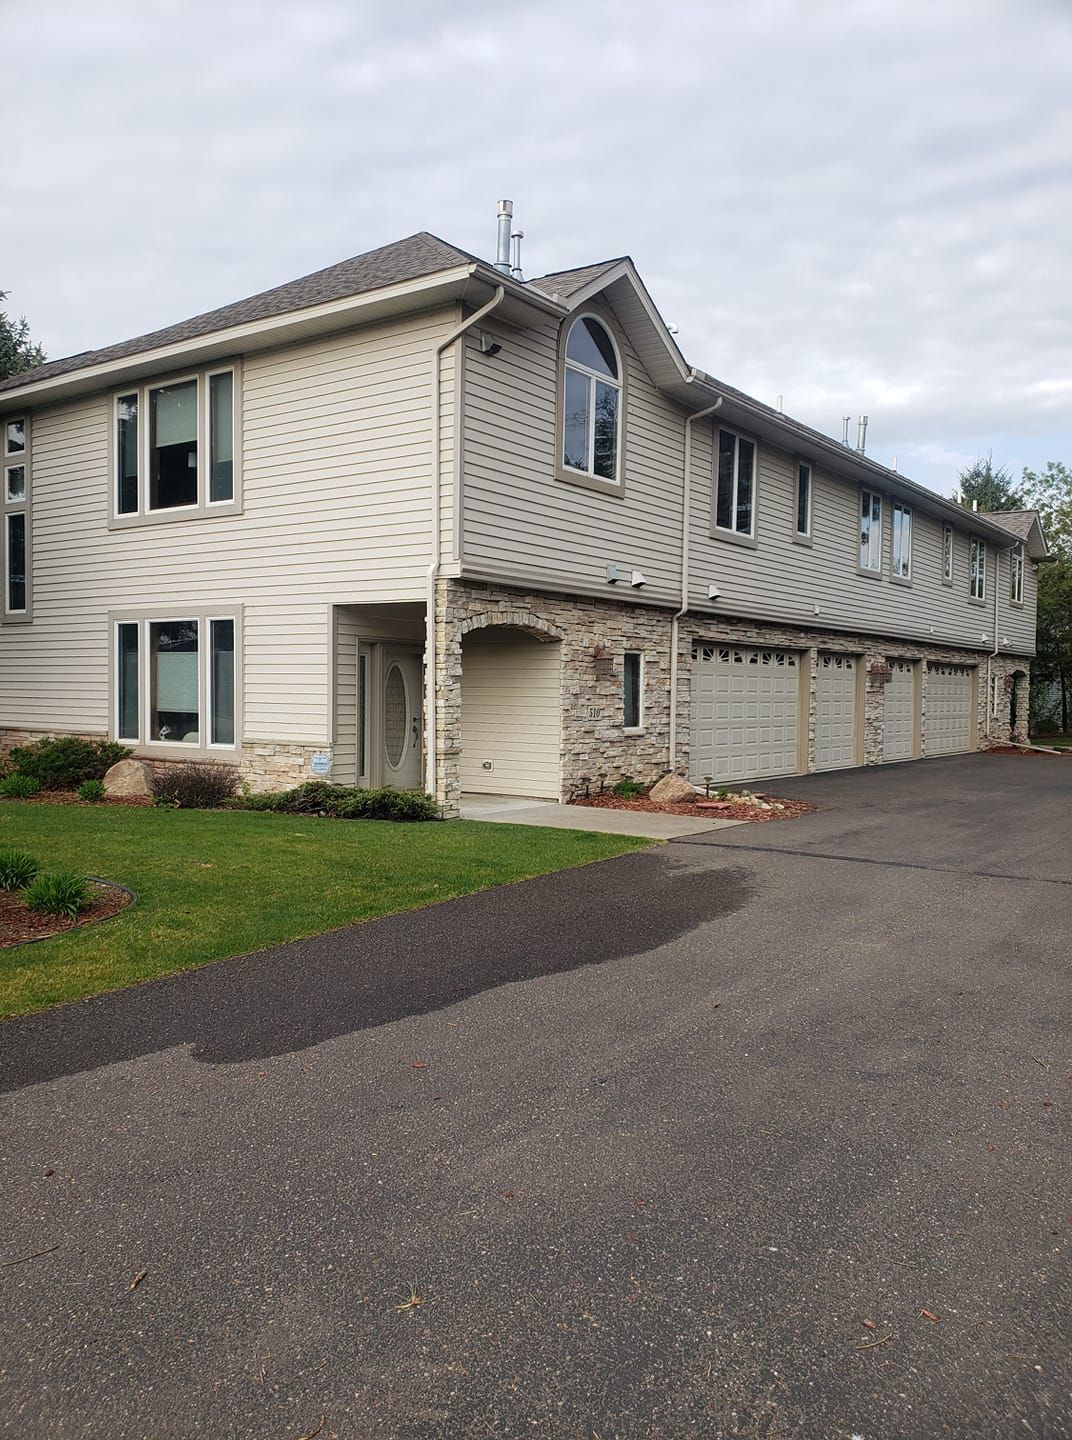 Our Home Softwash service gently cleans your home's exterior with a non-toxic, biodegradable detergent to remove dirt, mold & mildew. Our soft washing process is safe for homes with vinyl siding, wood siding, stucco and painted surfaces. for Wash the City in Hudson, WI